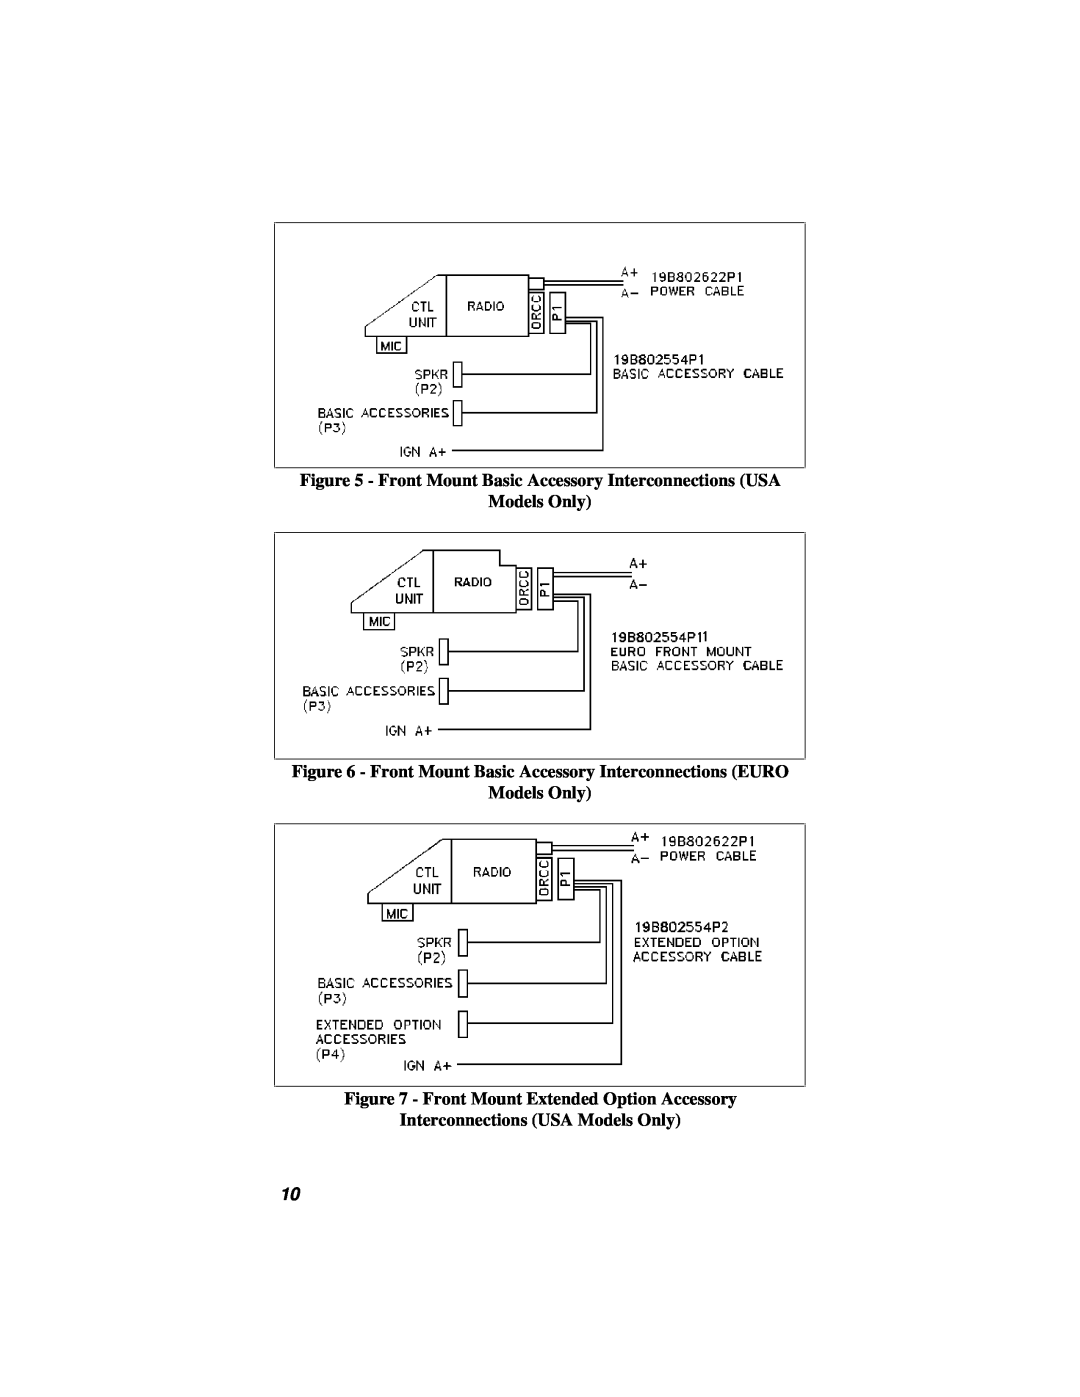 Ericsson 38901E installation manual Front Mount Extended Option Accessory, Interconnections USA Models Only 